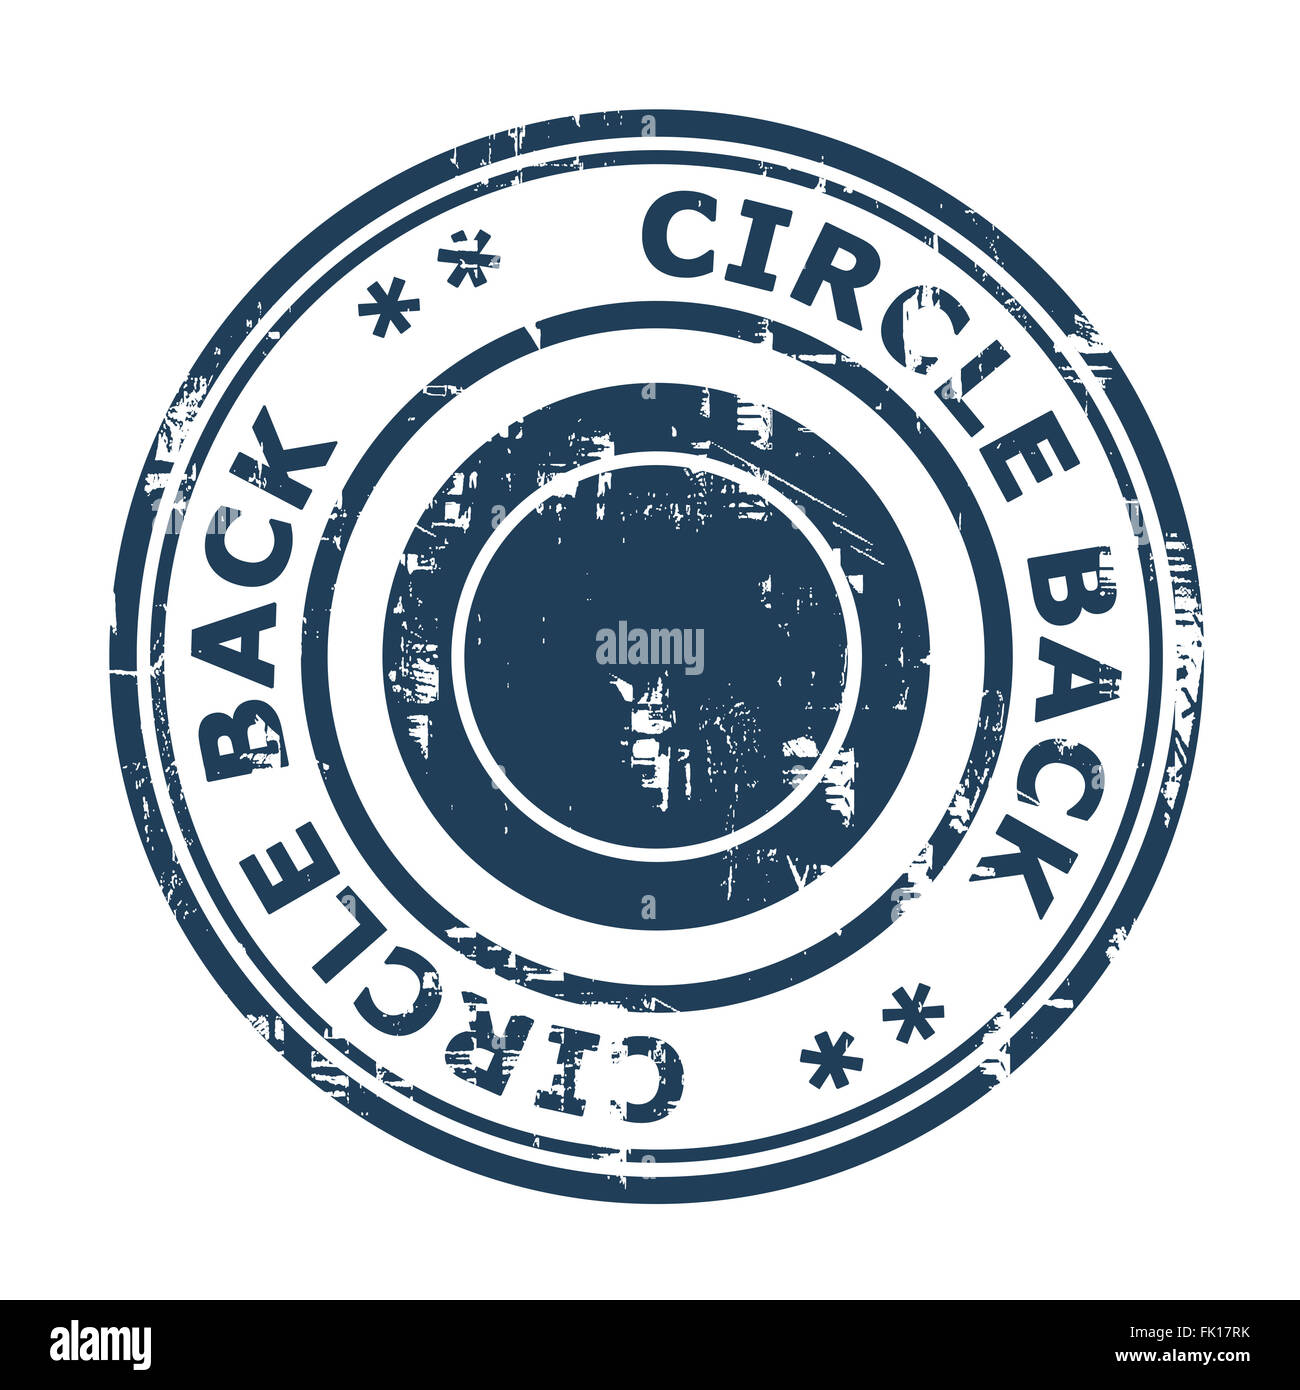 Circle back business concept stamp isolated on a white background. Stock Photo